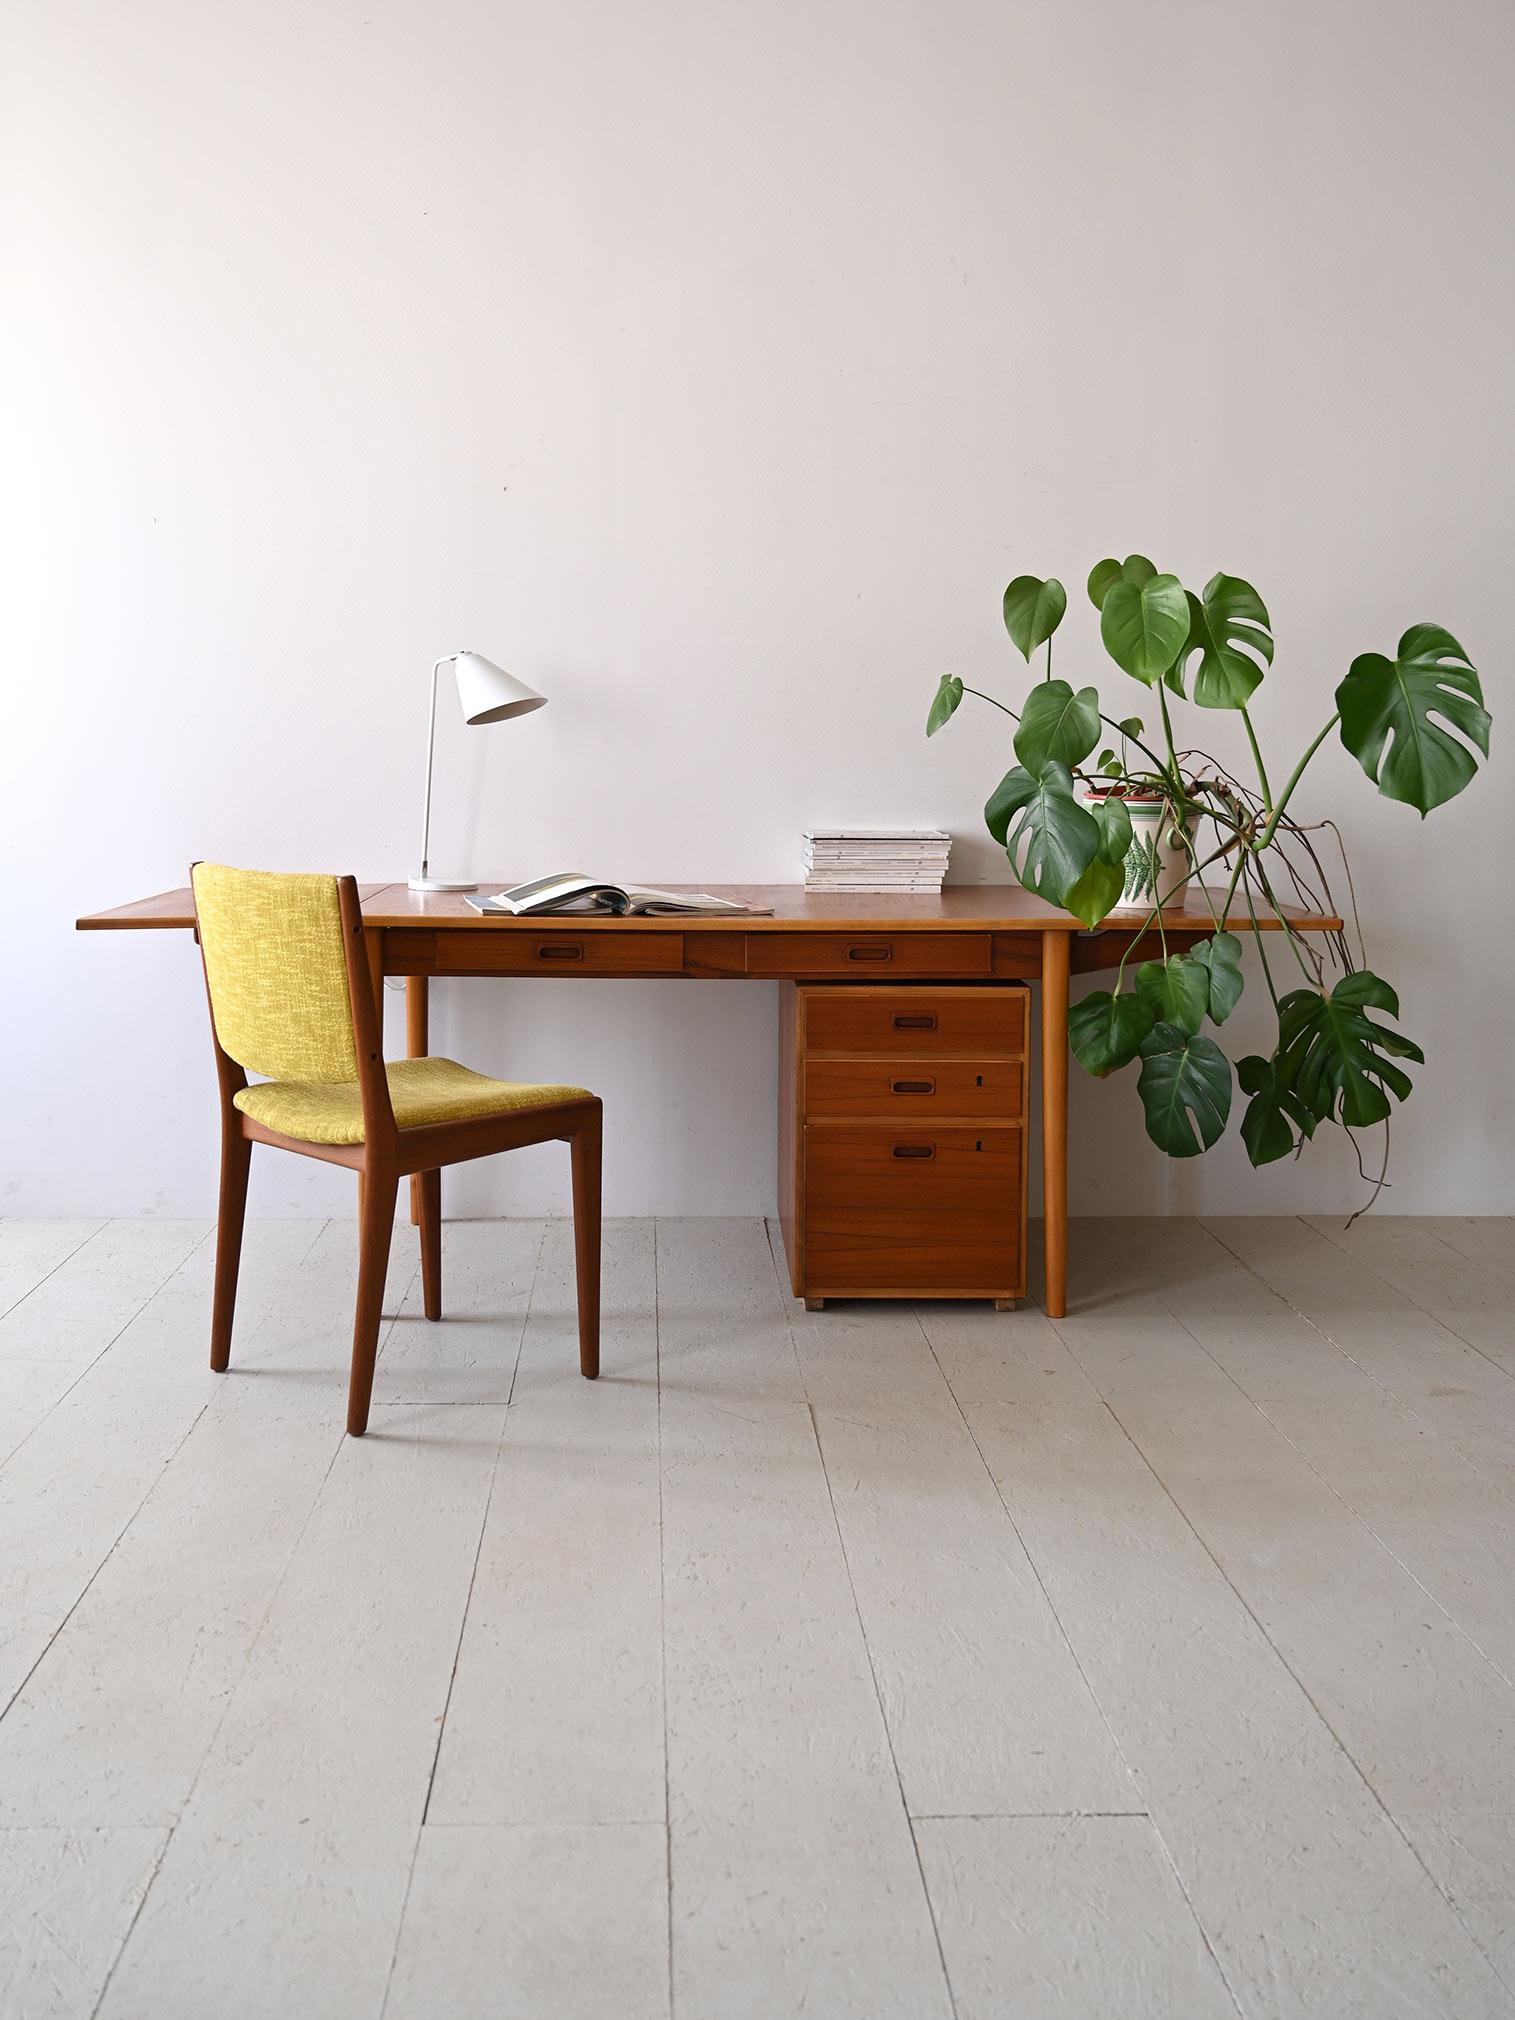 1960s teak office extension table.

An original desk from the 1960s that embodies the essence of the golden age of Nordic design.
The main plane, with its clean lines and large surface area, provides generous space to work and can be further